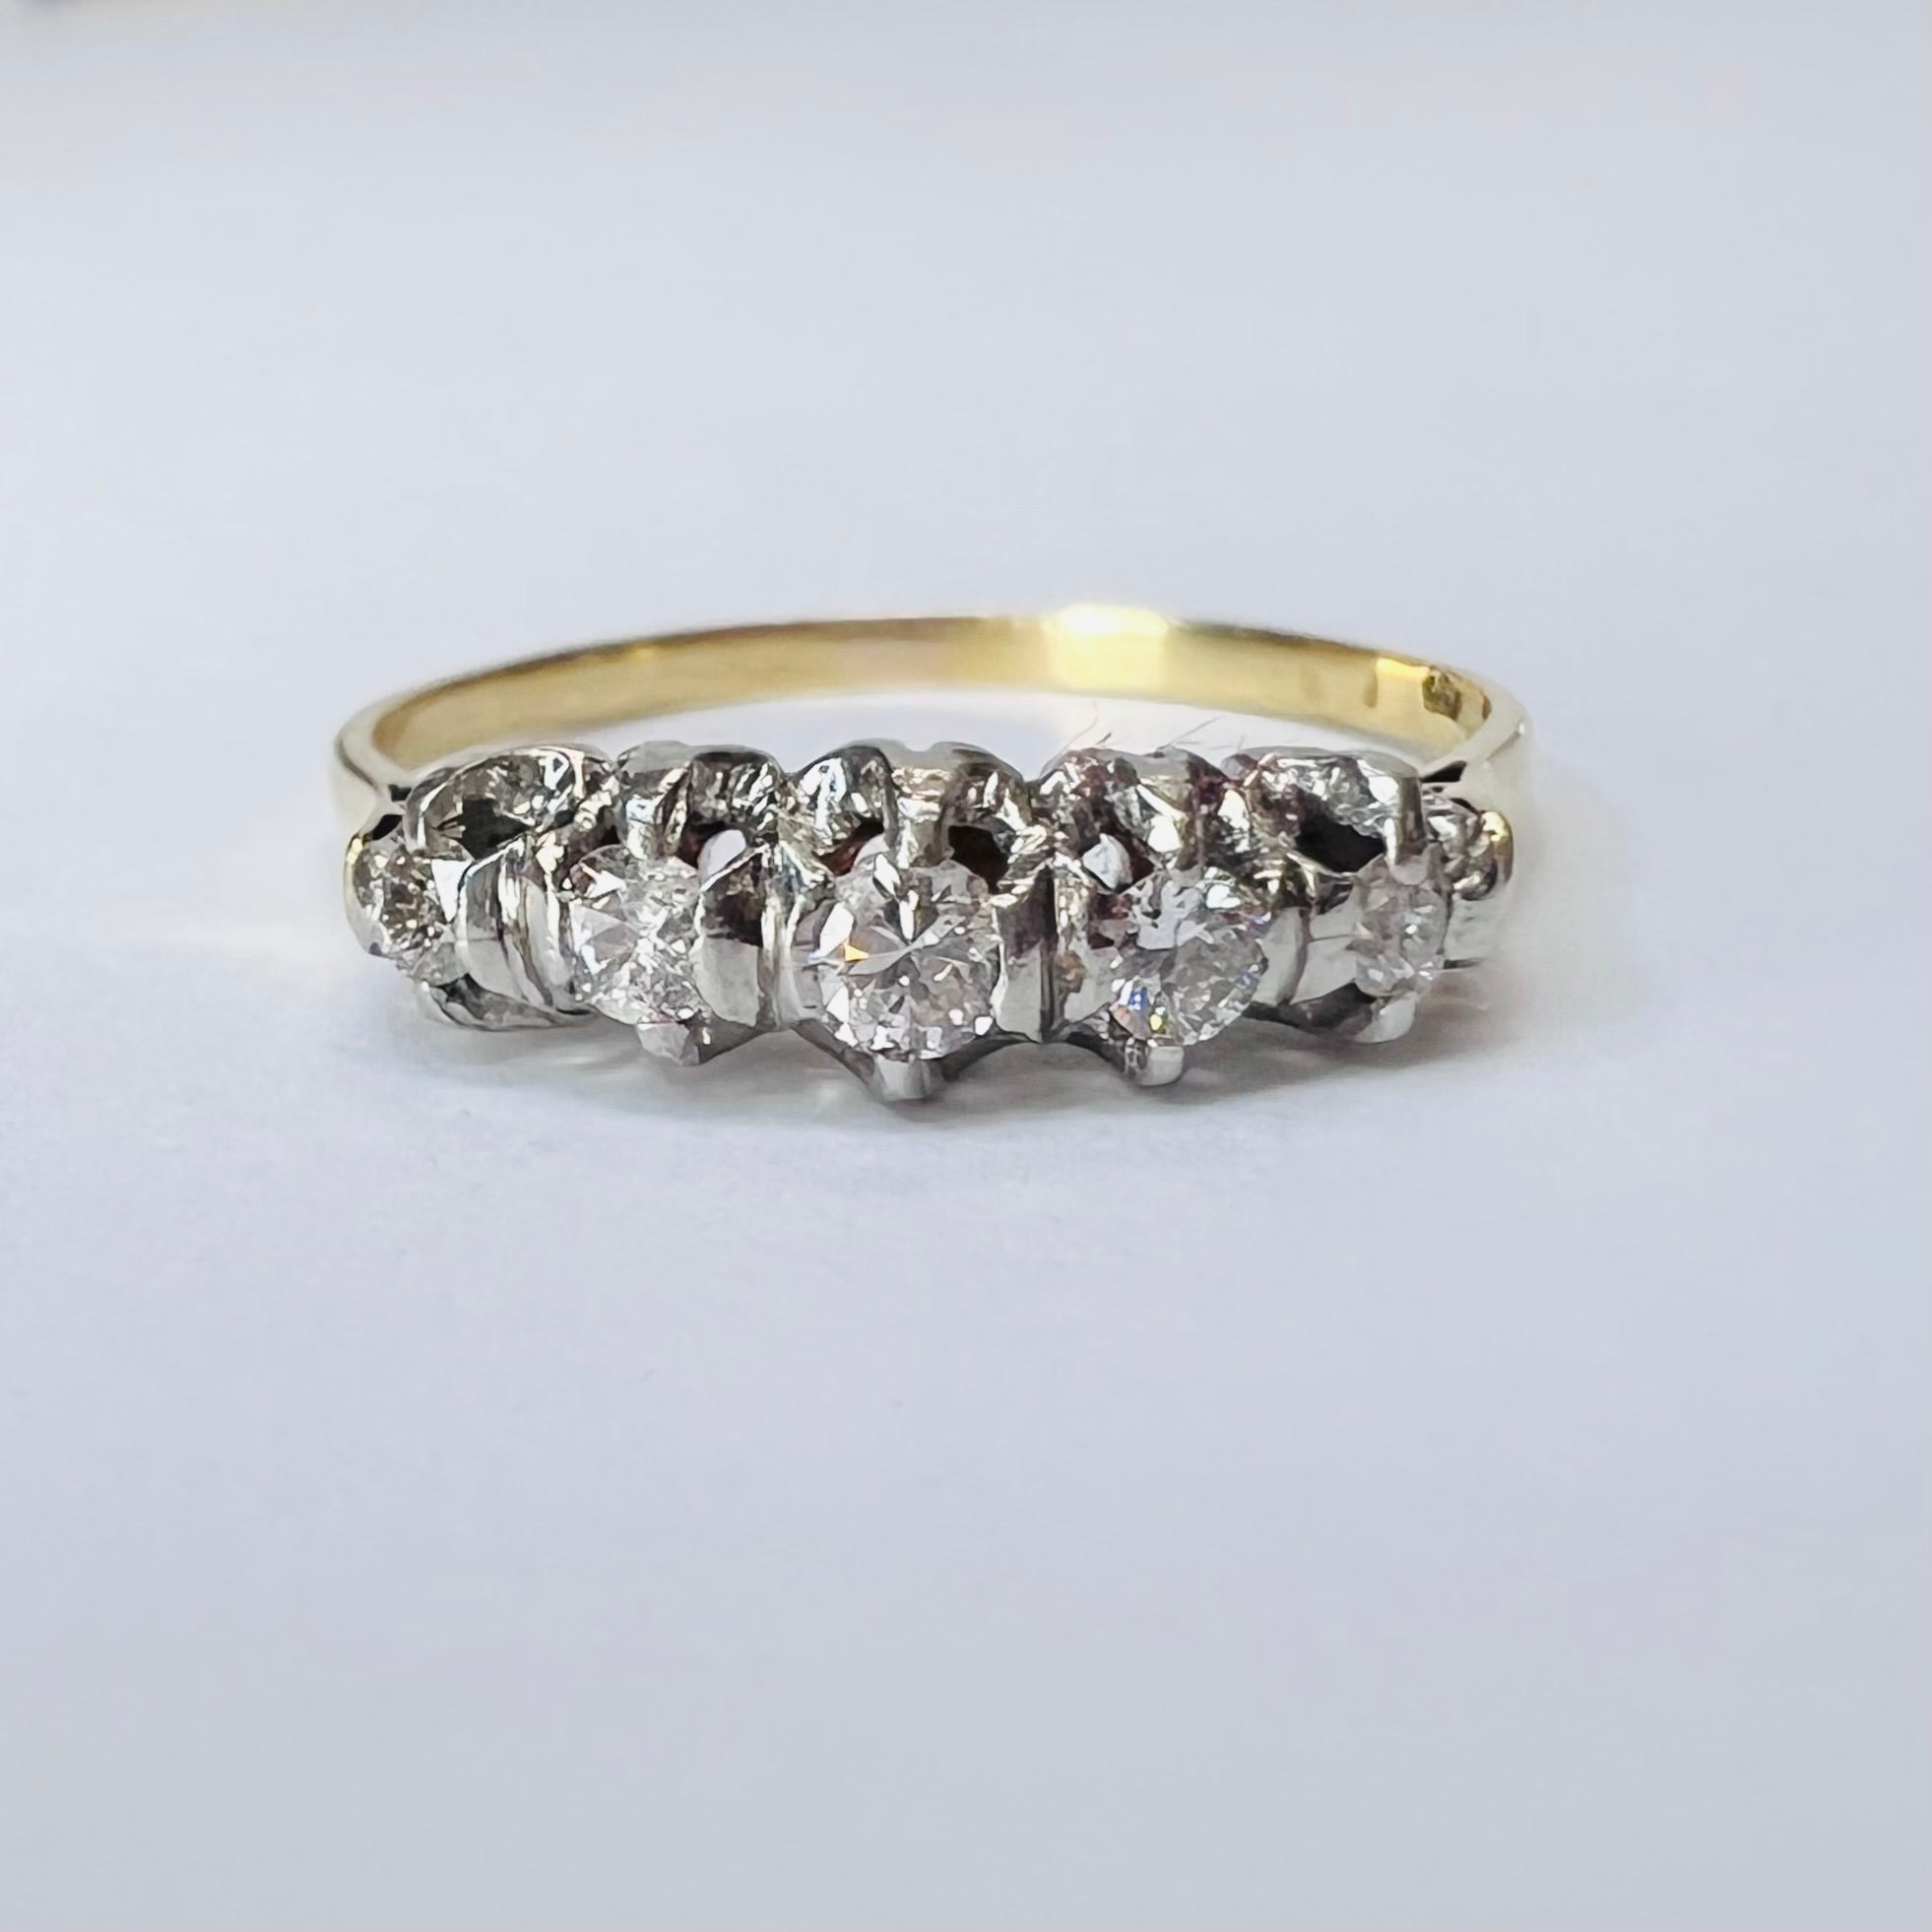 Antique 18K Yellow Gold and Platinum .20CTW Diamond Ring Band Size 7